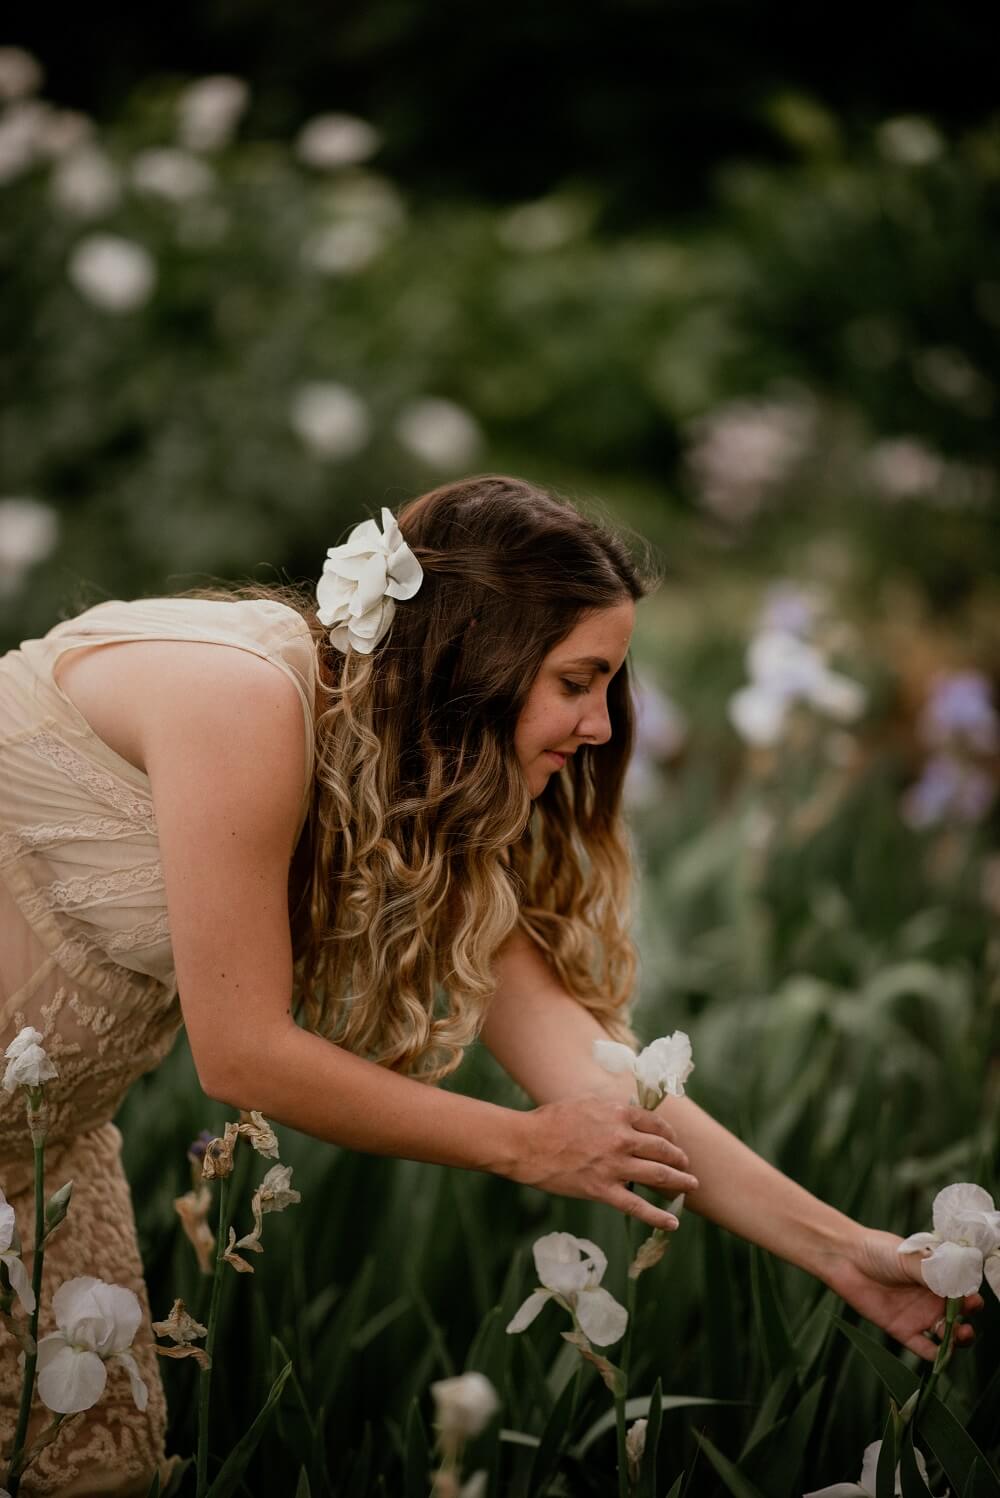 Chelsea from Chelsart picking white flowers in a field with flowers in hair.